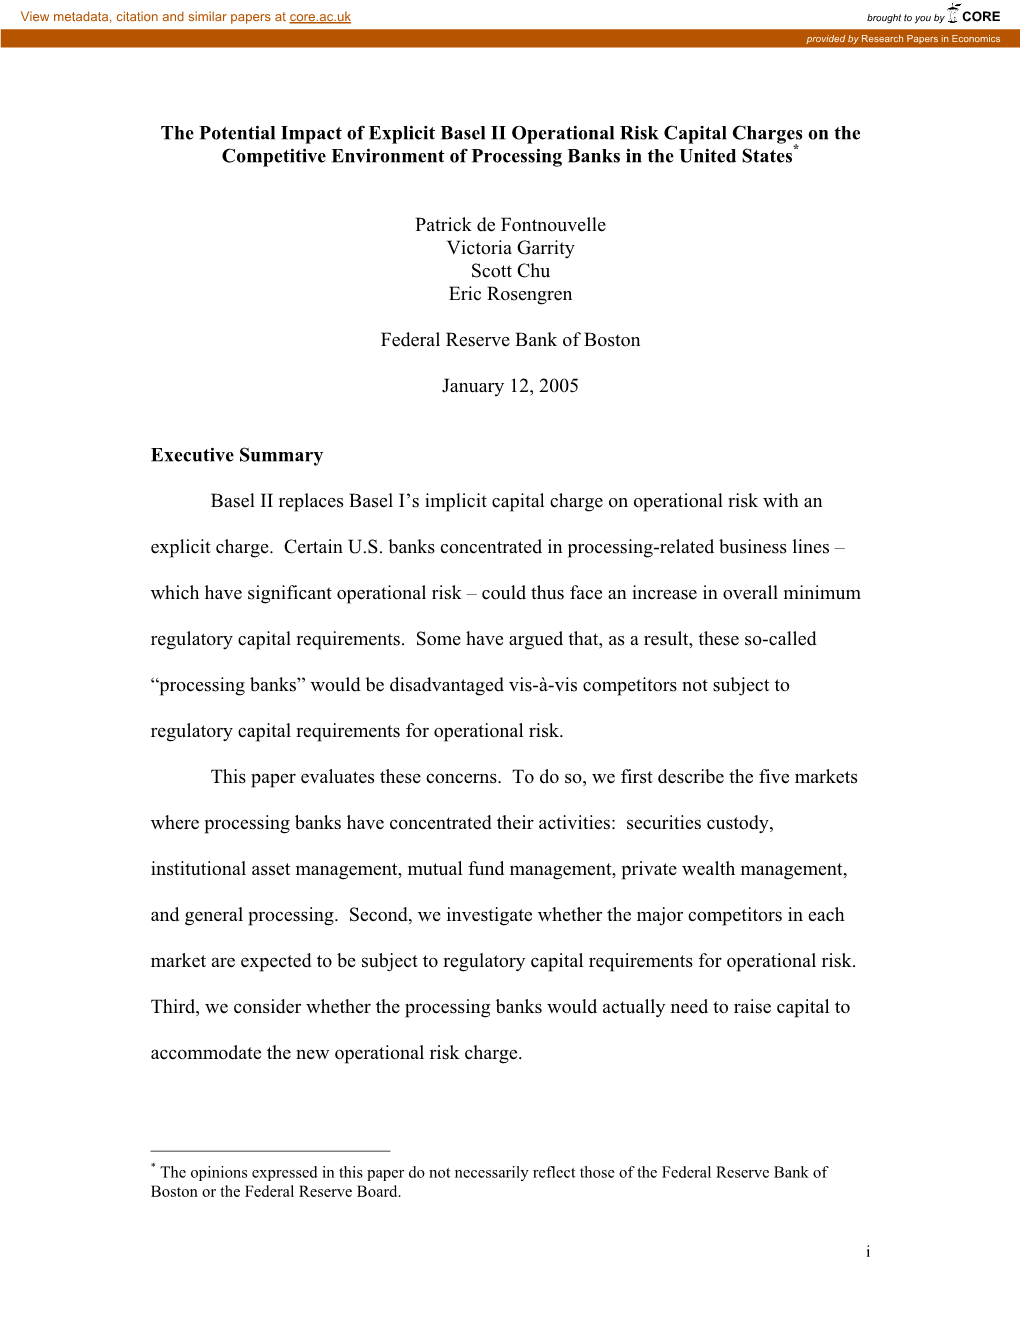 The Potential Impact of Explicit Basel II Operational Risk Capital Charges on the Competitive Environment of Processing Banks in the United States*